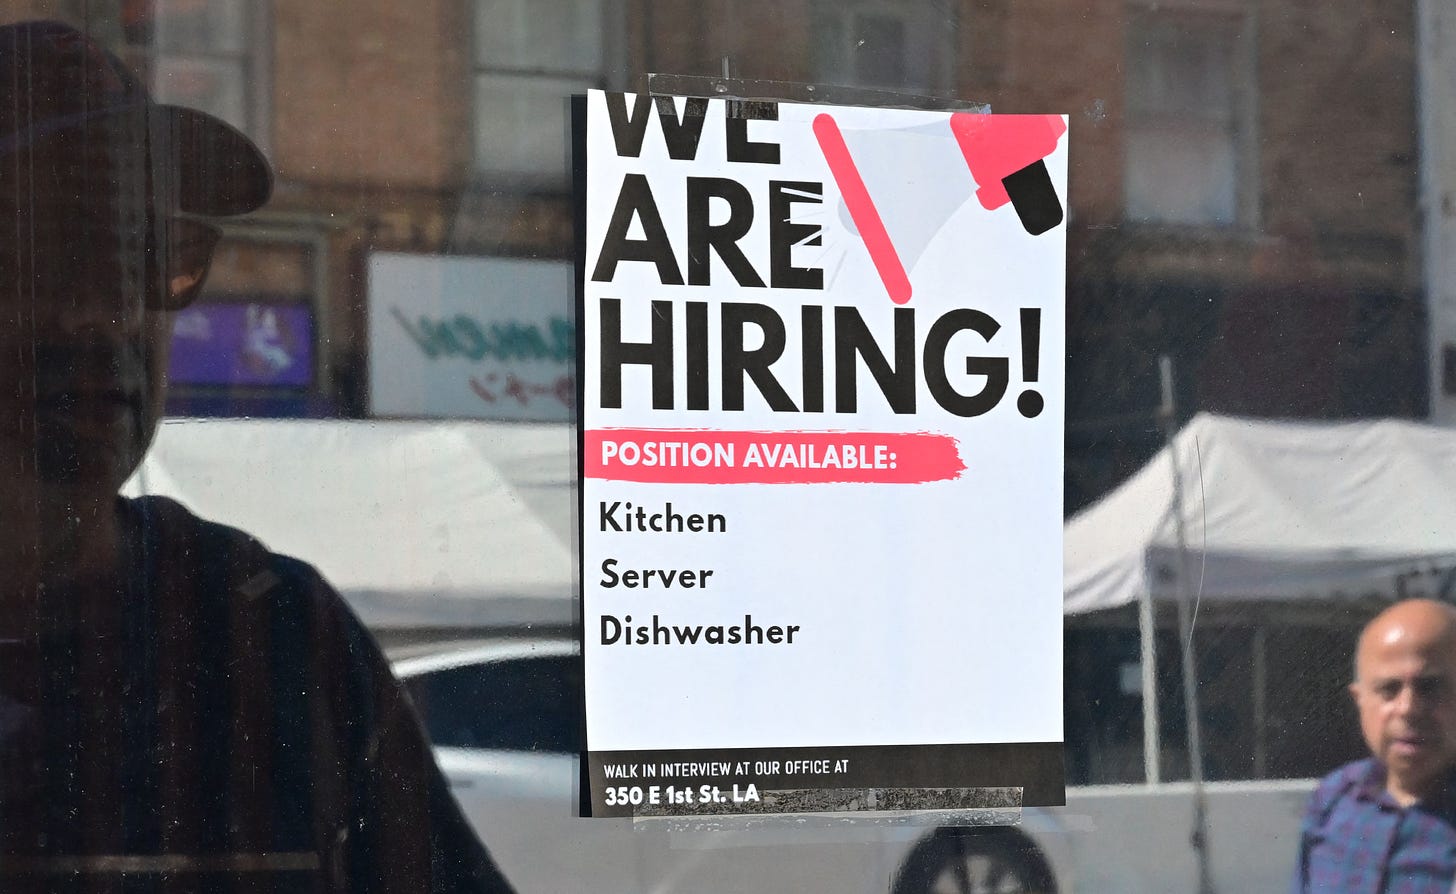 A "We Are Hiring" sign is posted in front of a restaurant in Los Angeles.